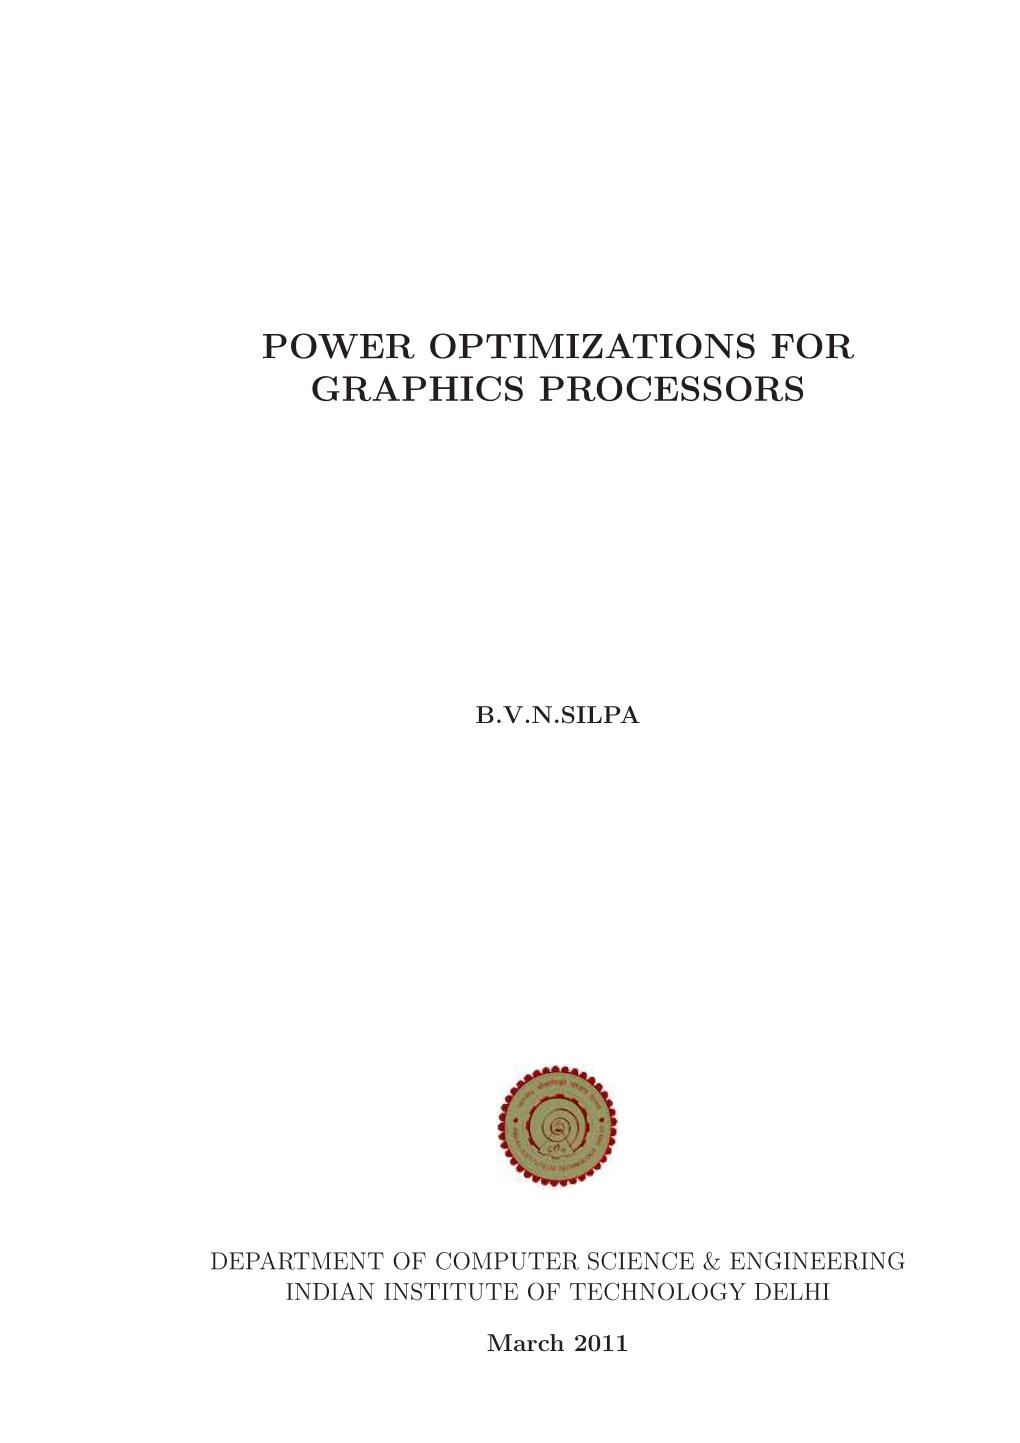 Power Optimizations for Graphics Processors